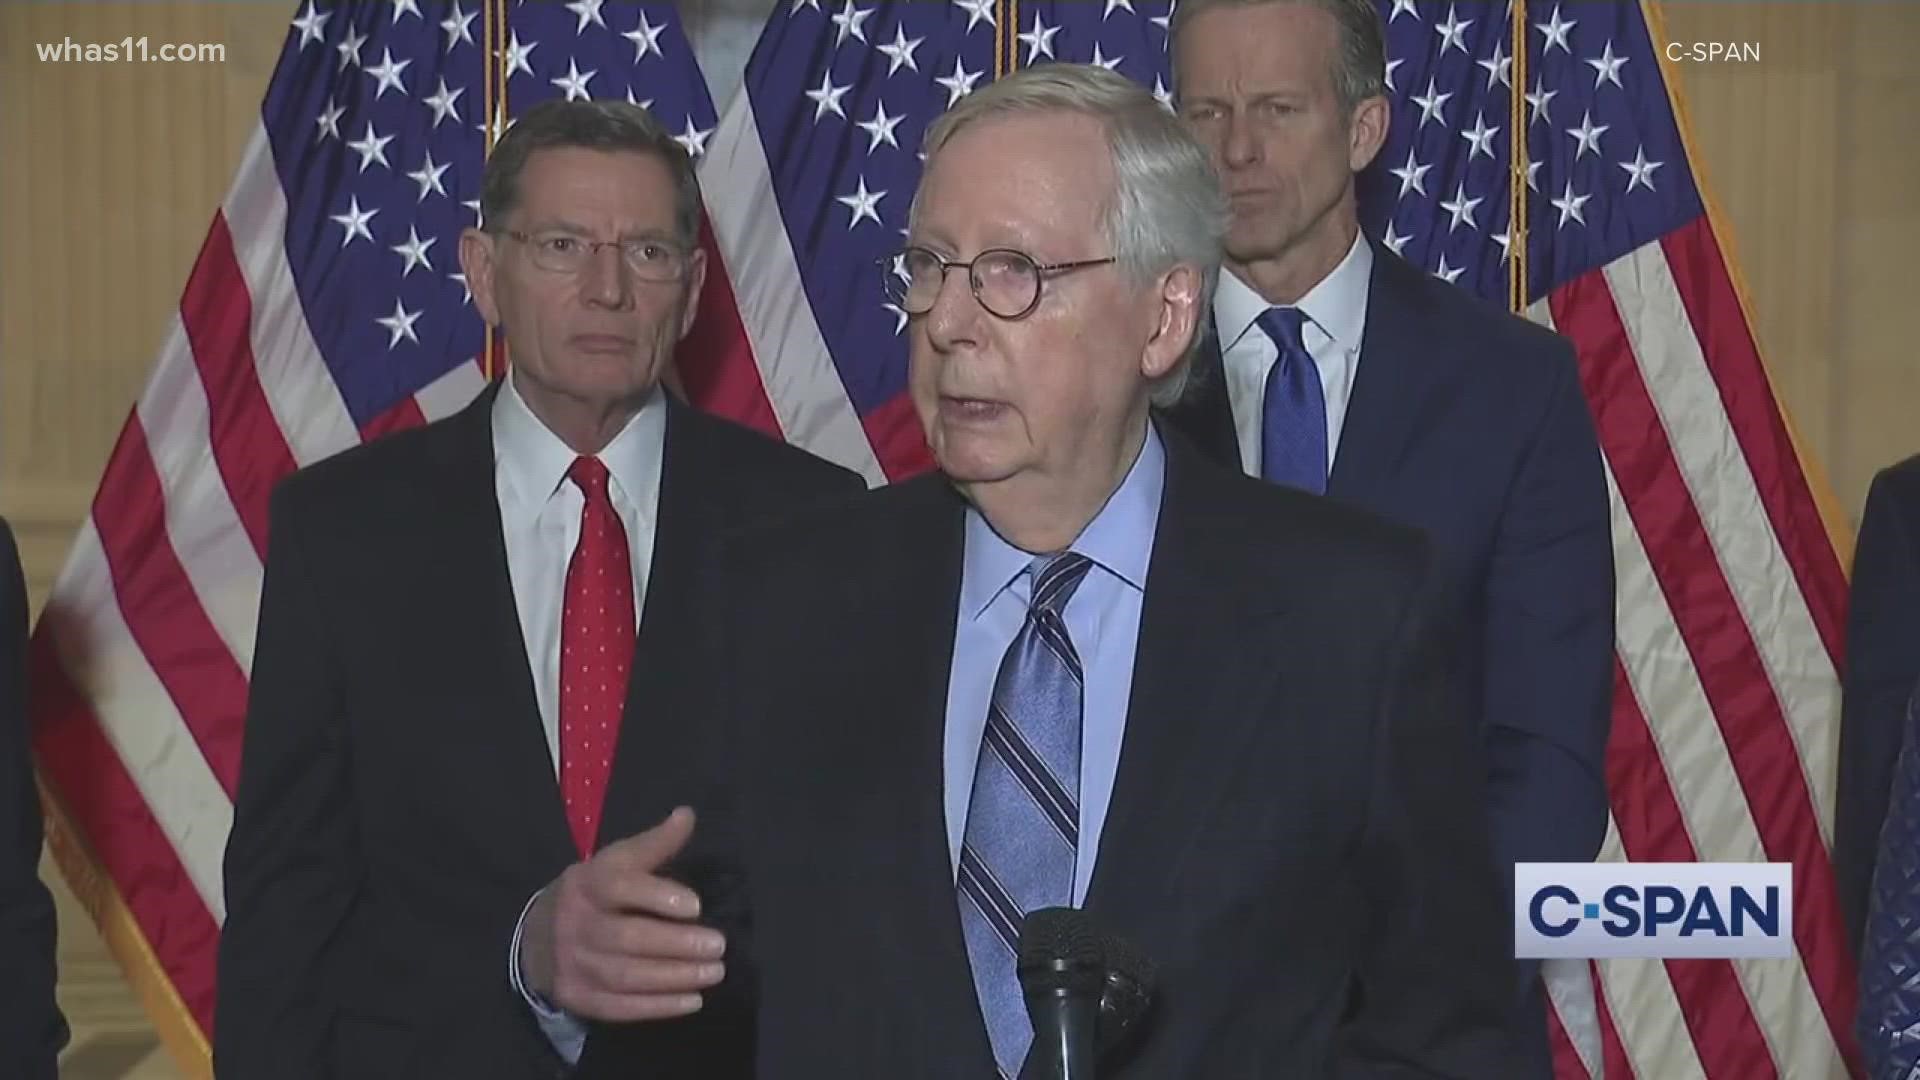 Senate Republican leader Mitch McConnell said criticism about his comments on Black voters was an "outrageous mischaracterization."